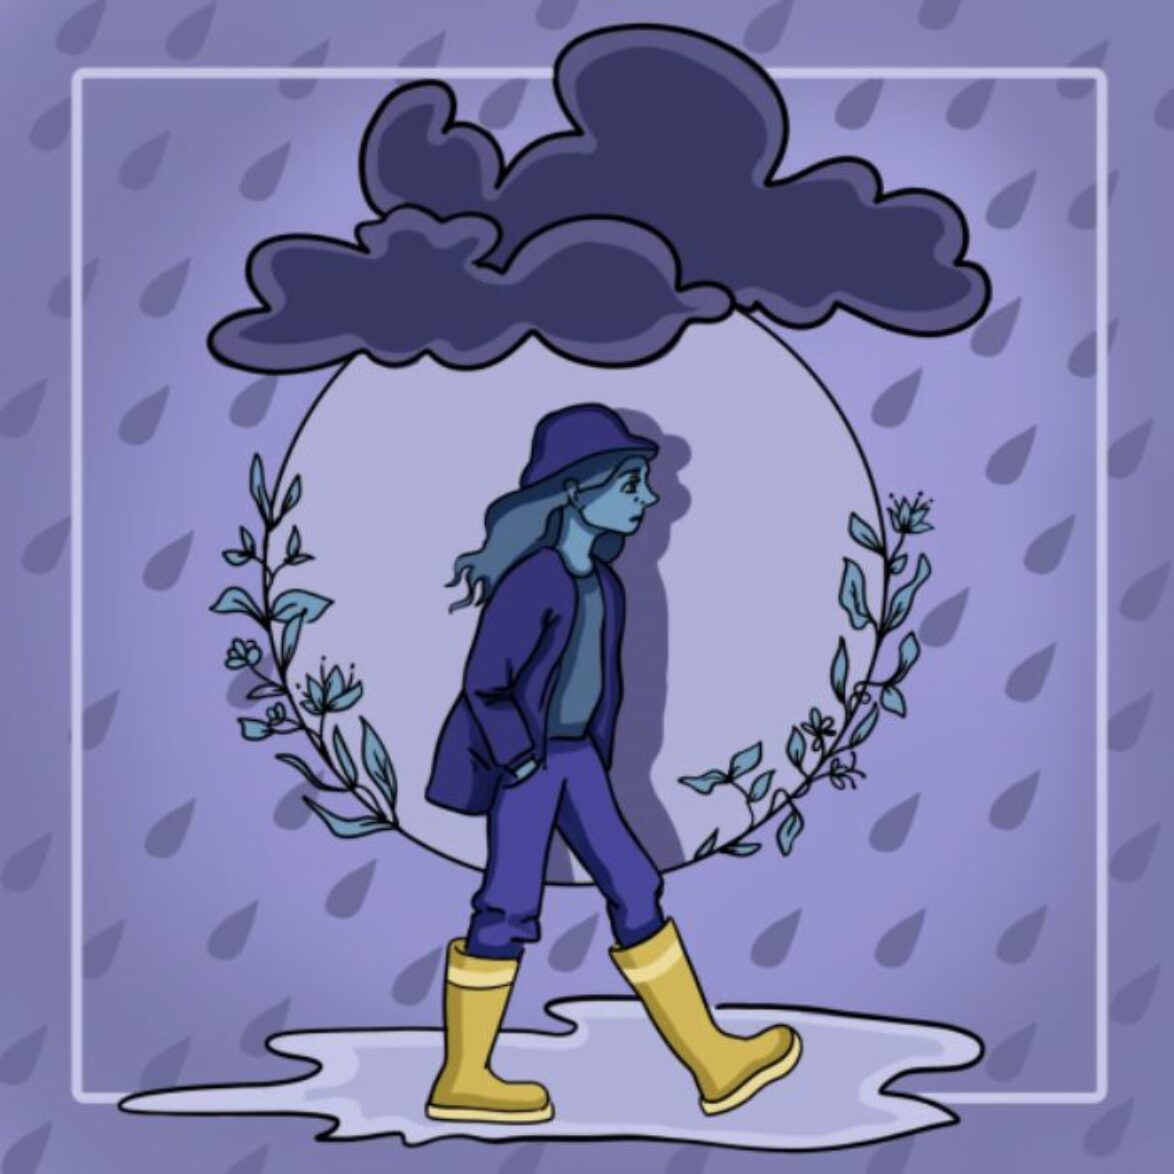 A graphic of a woman walking under a raincloud, all in blue, with yellow wellies.